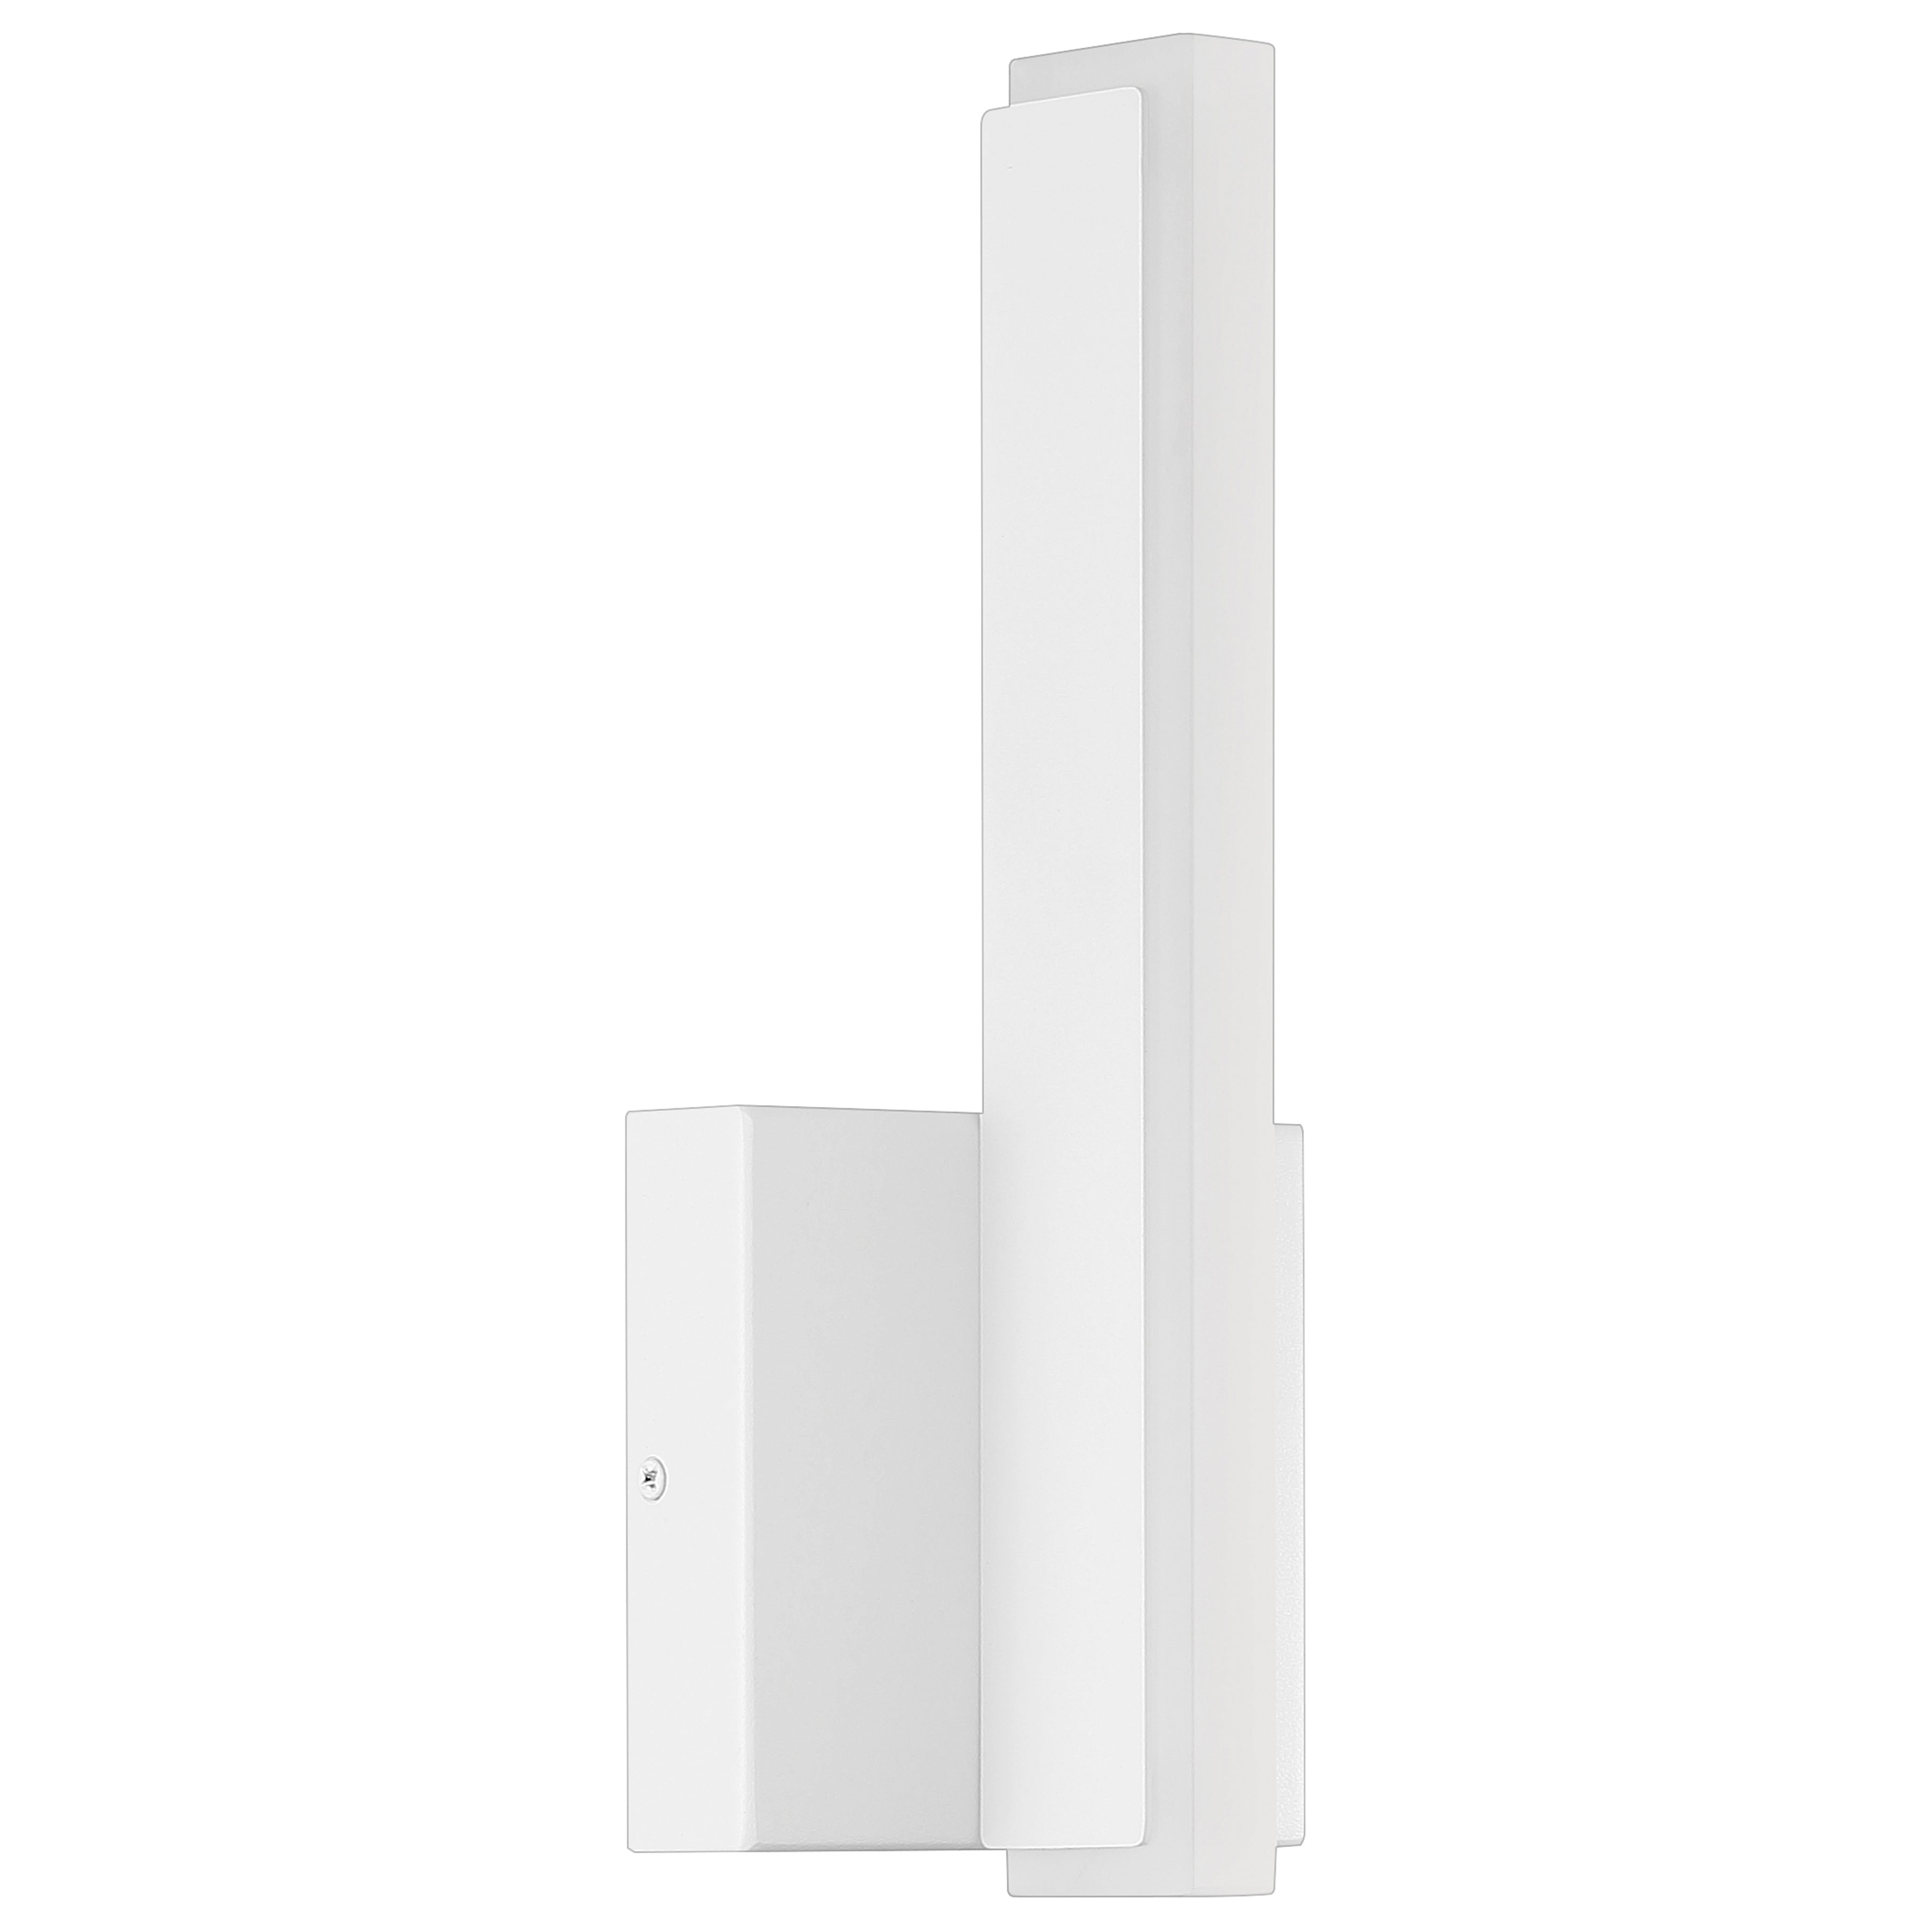 matte white dual voltage led wall sconce